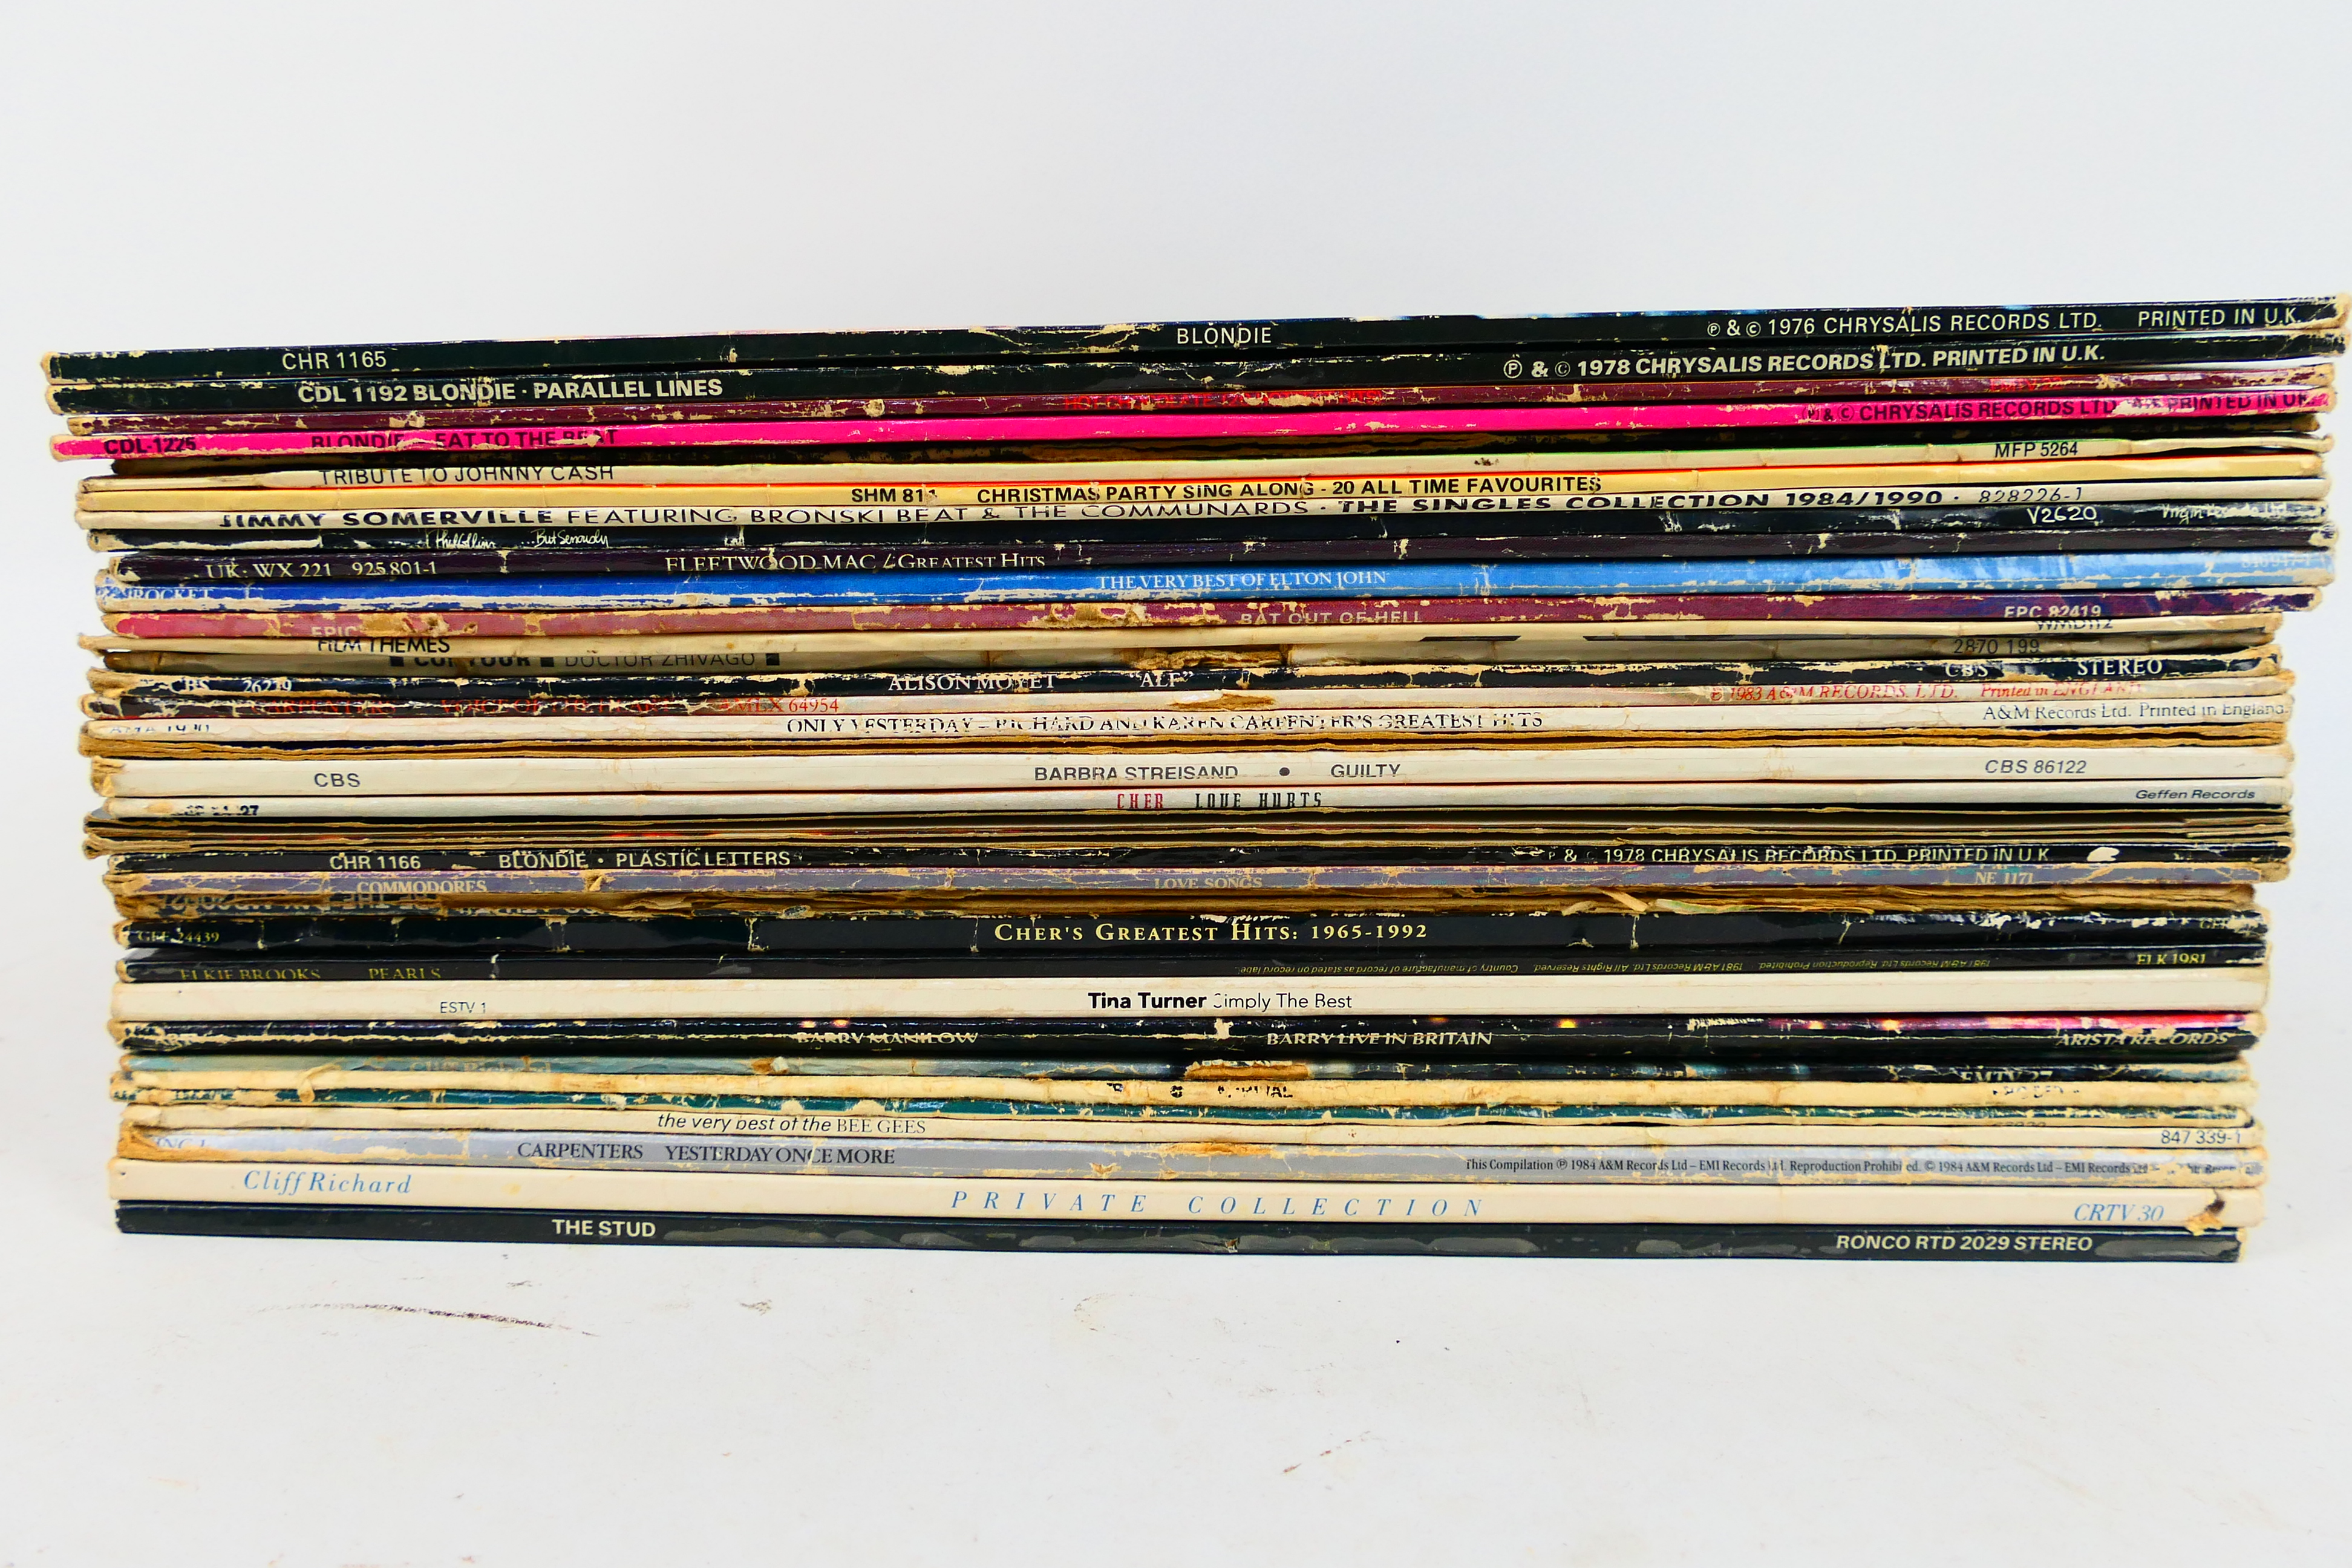 A collection of 12" vinyl records to inc